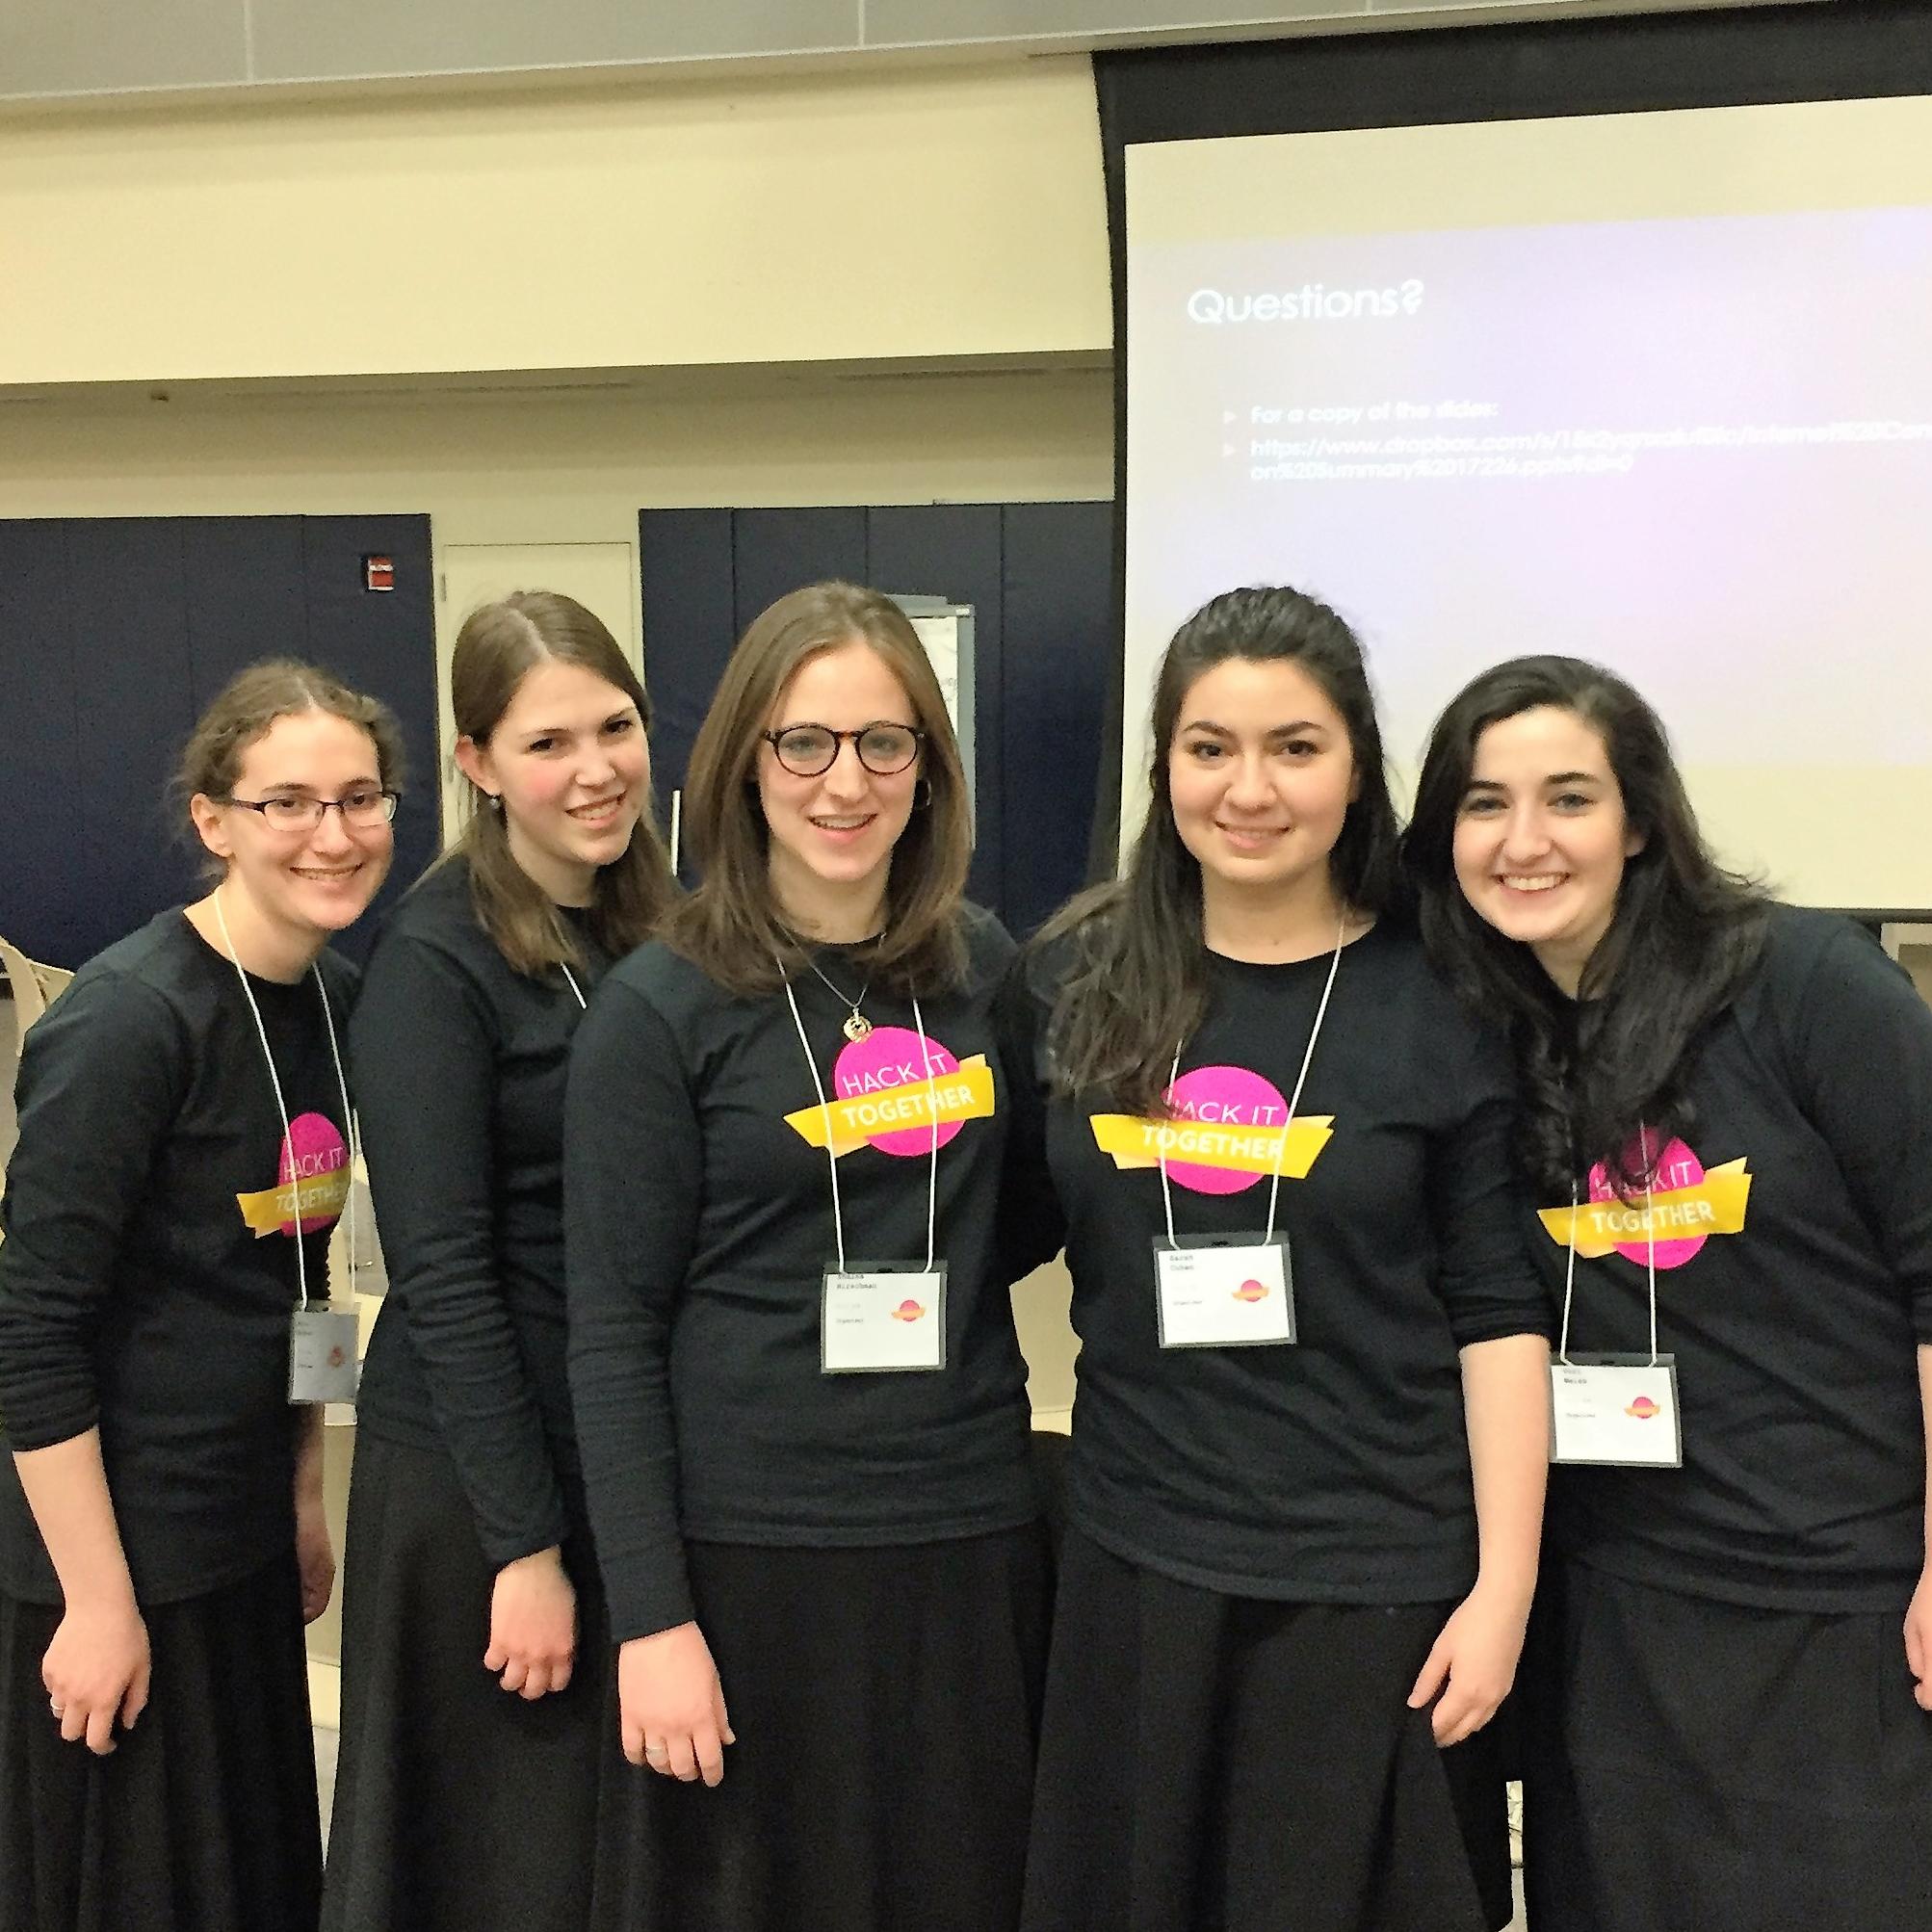 These LCW students organized LCW\'s second annual Hackathon, Hack It Together. Close to a hundred college students from across NY and NJ took part in the event, held on February 24.